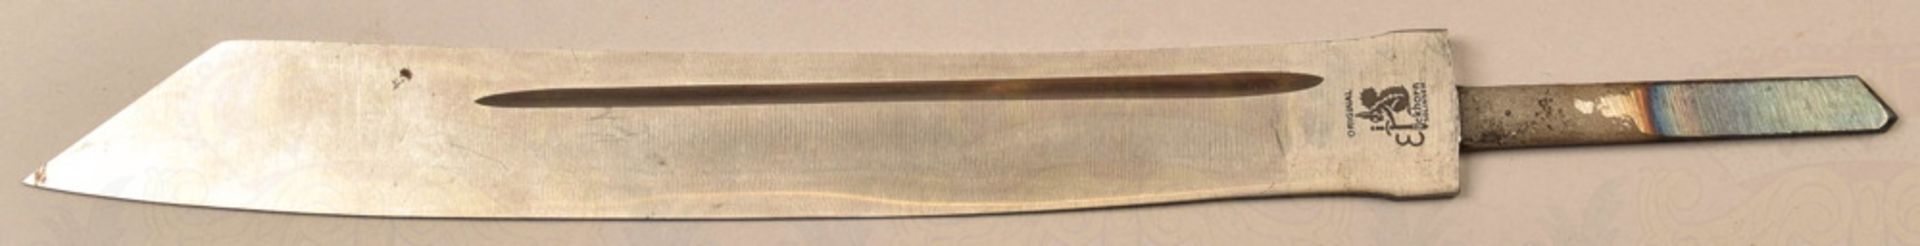 Blade for leaders dagger of the Reich Labour Service - Image 3 of 4